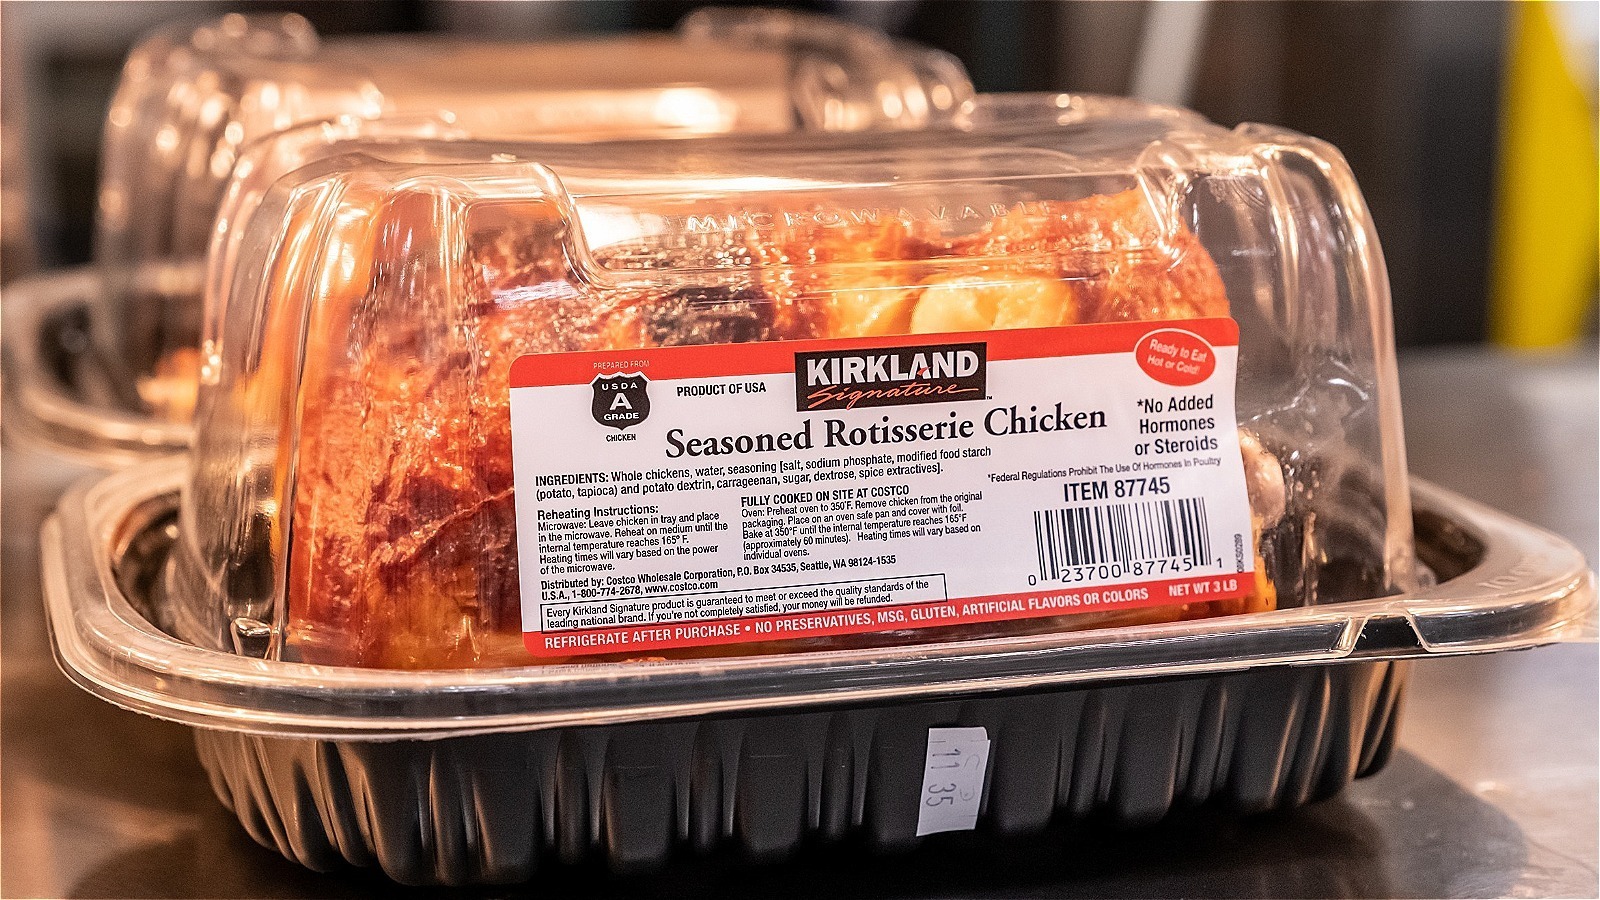 TikTok Is Cracking Up Over A Costco Shopper's Reaction To Its Chicken